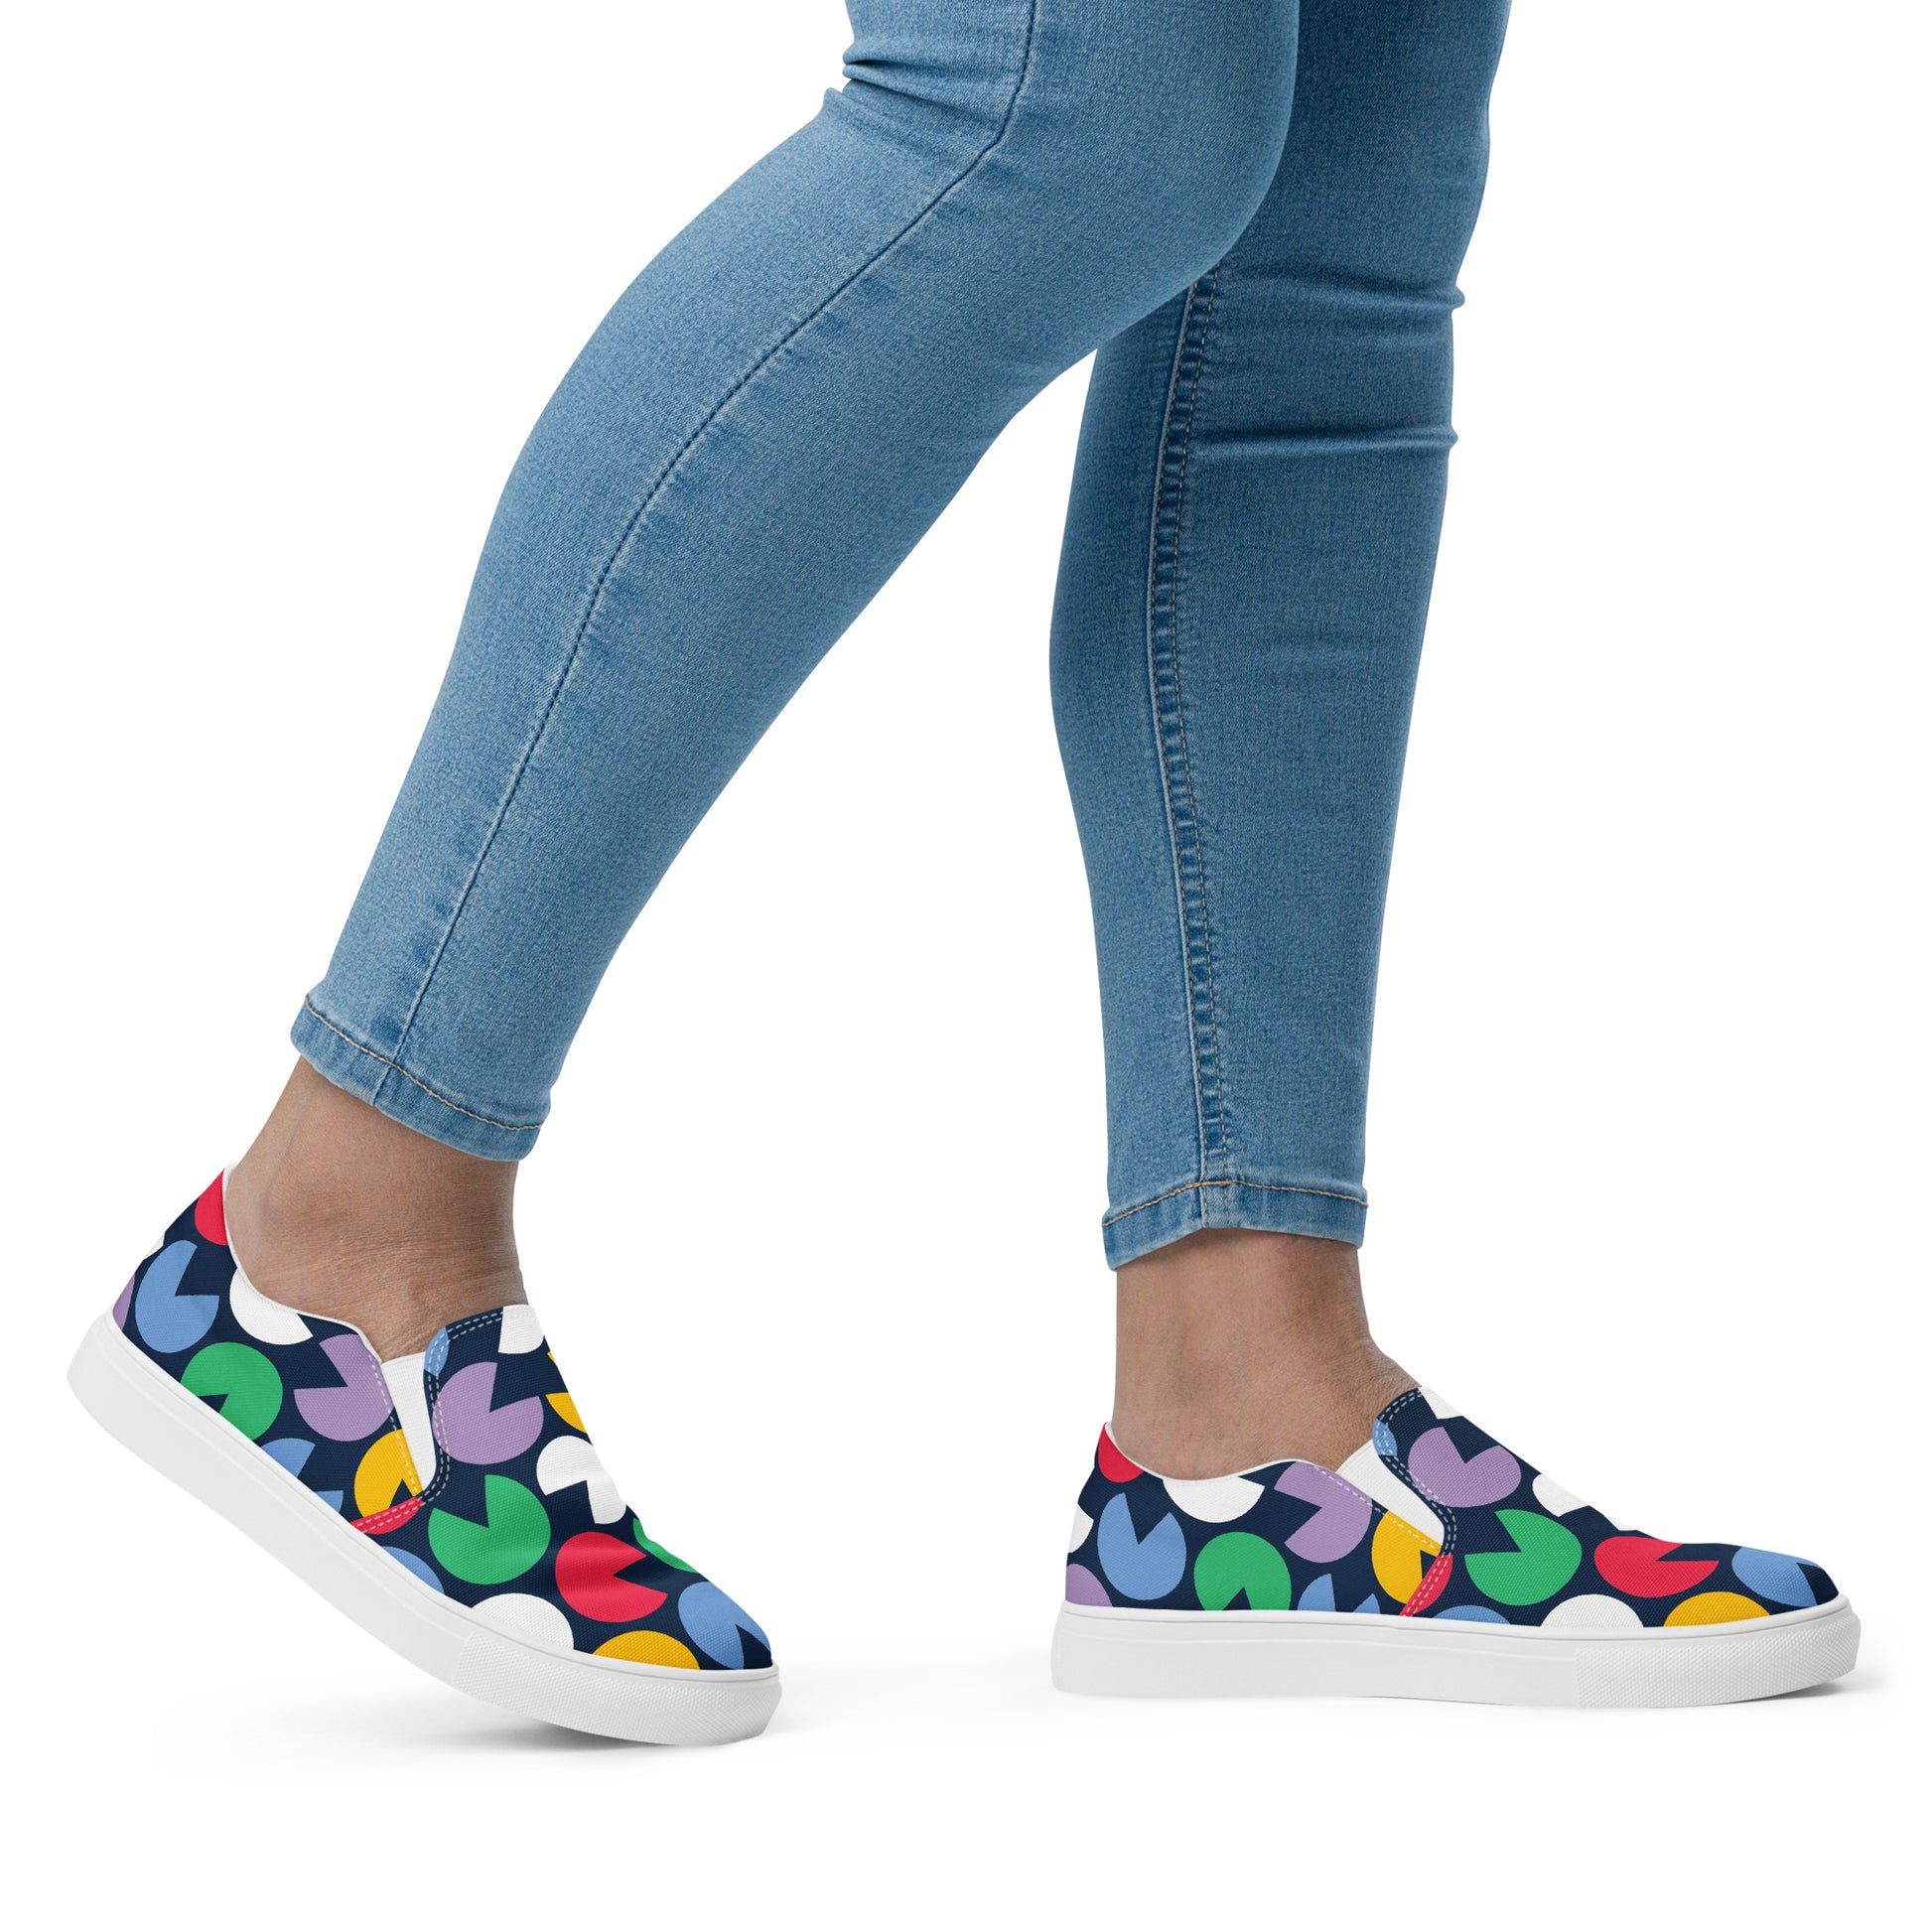 Hungry Circles - Women’s slip-on canvas shoes Womens Slip On Shoes